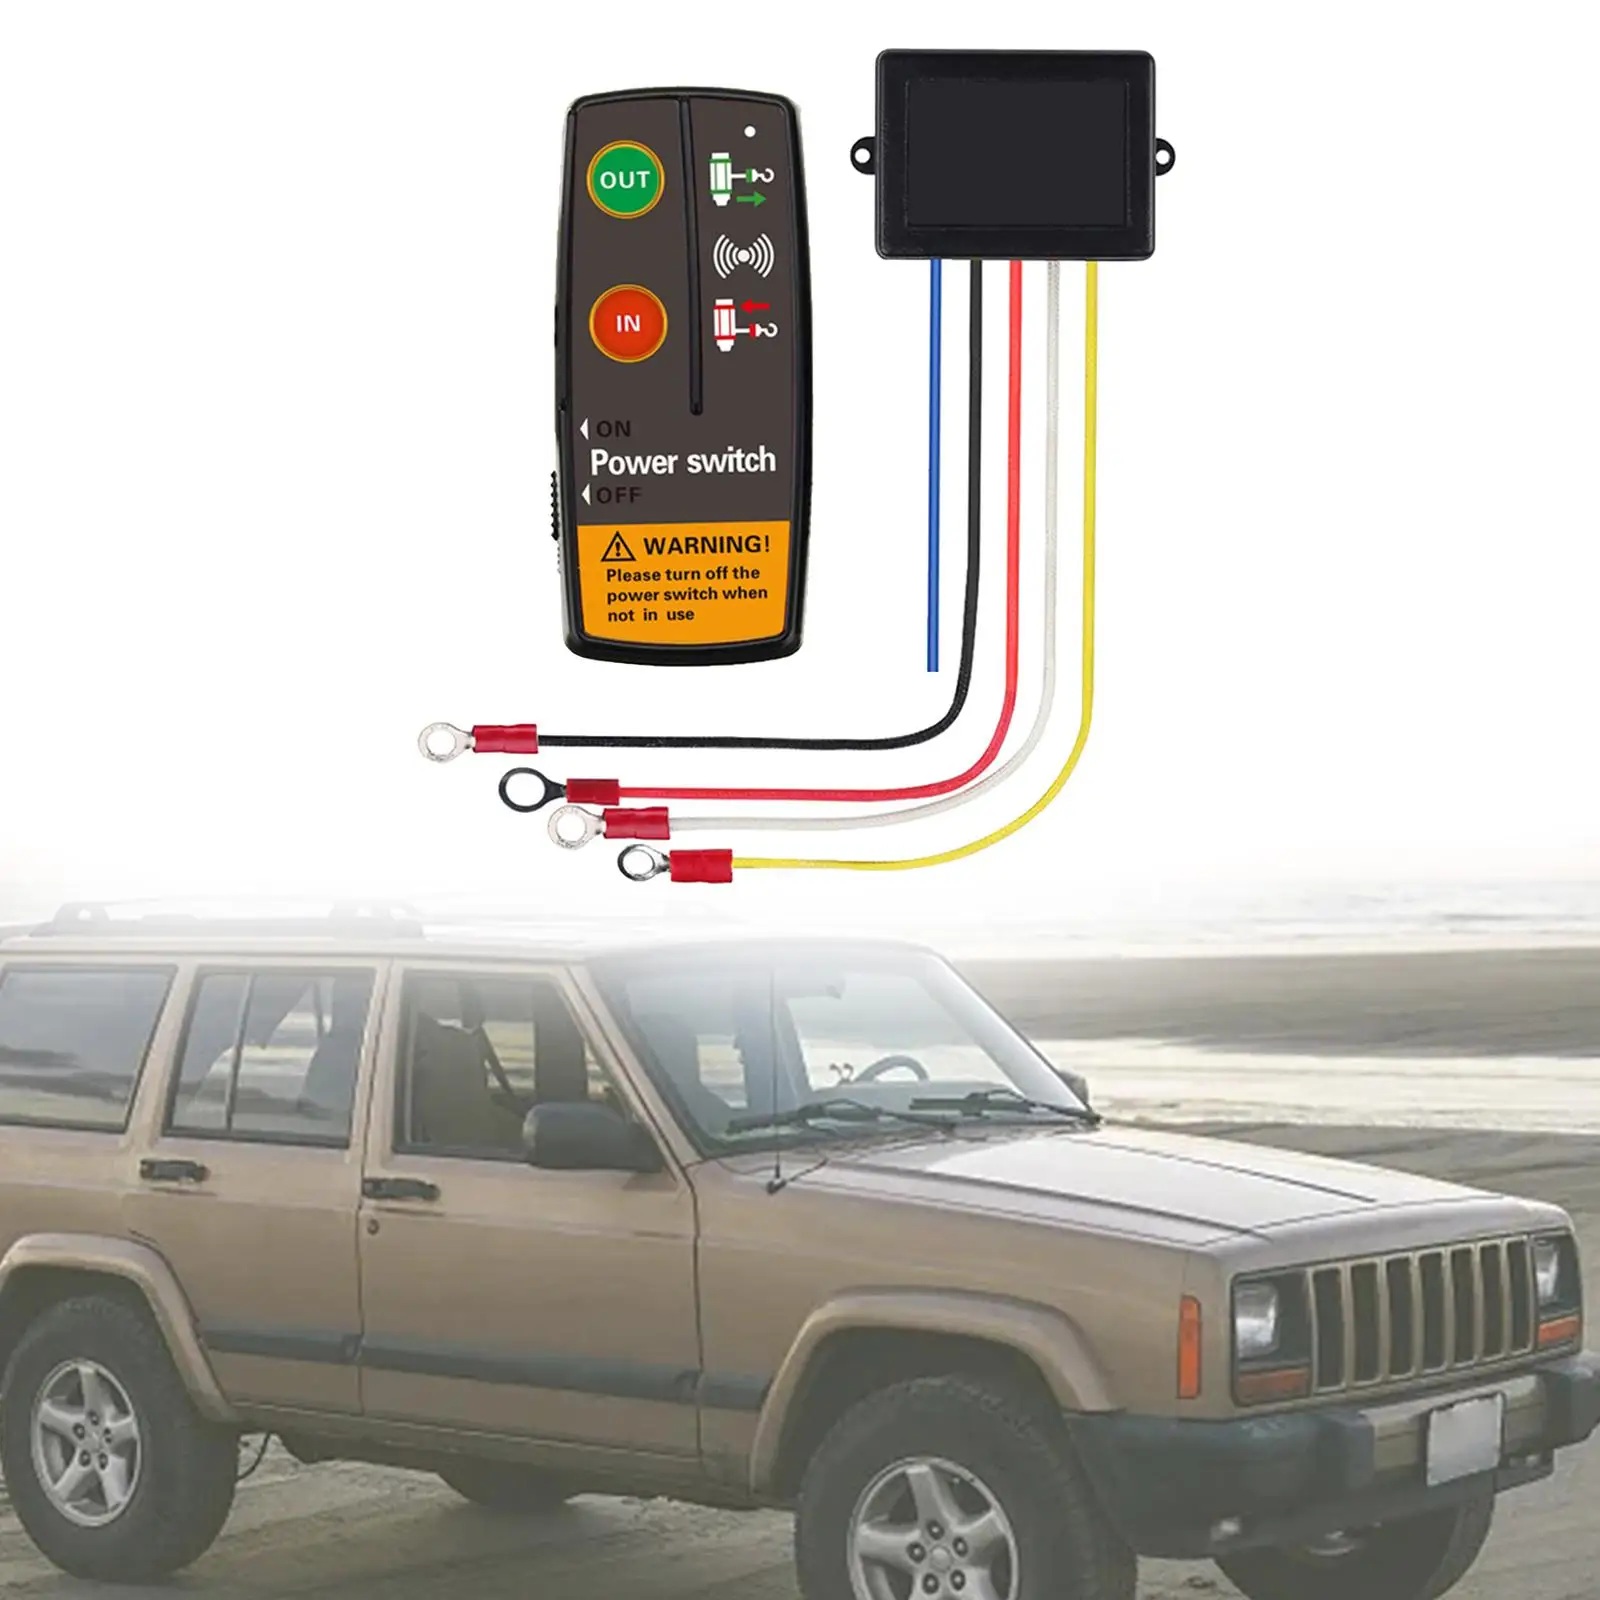 Winch Wireless Remote Control Switch Set with Indicator Light Replaces Winch Remote Control for UTV SUV Vehicle Trailer Car